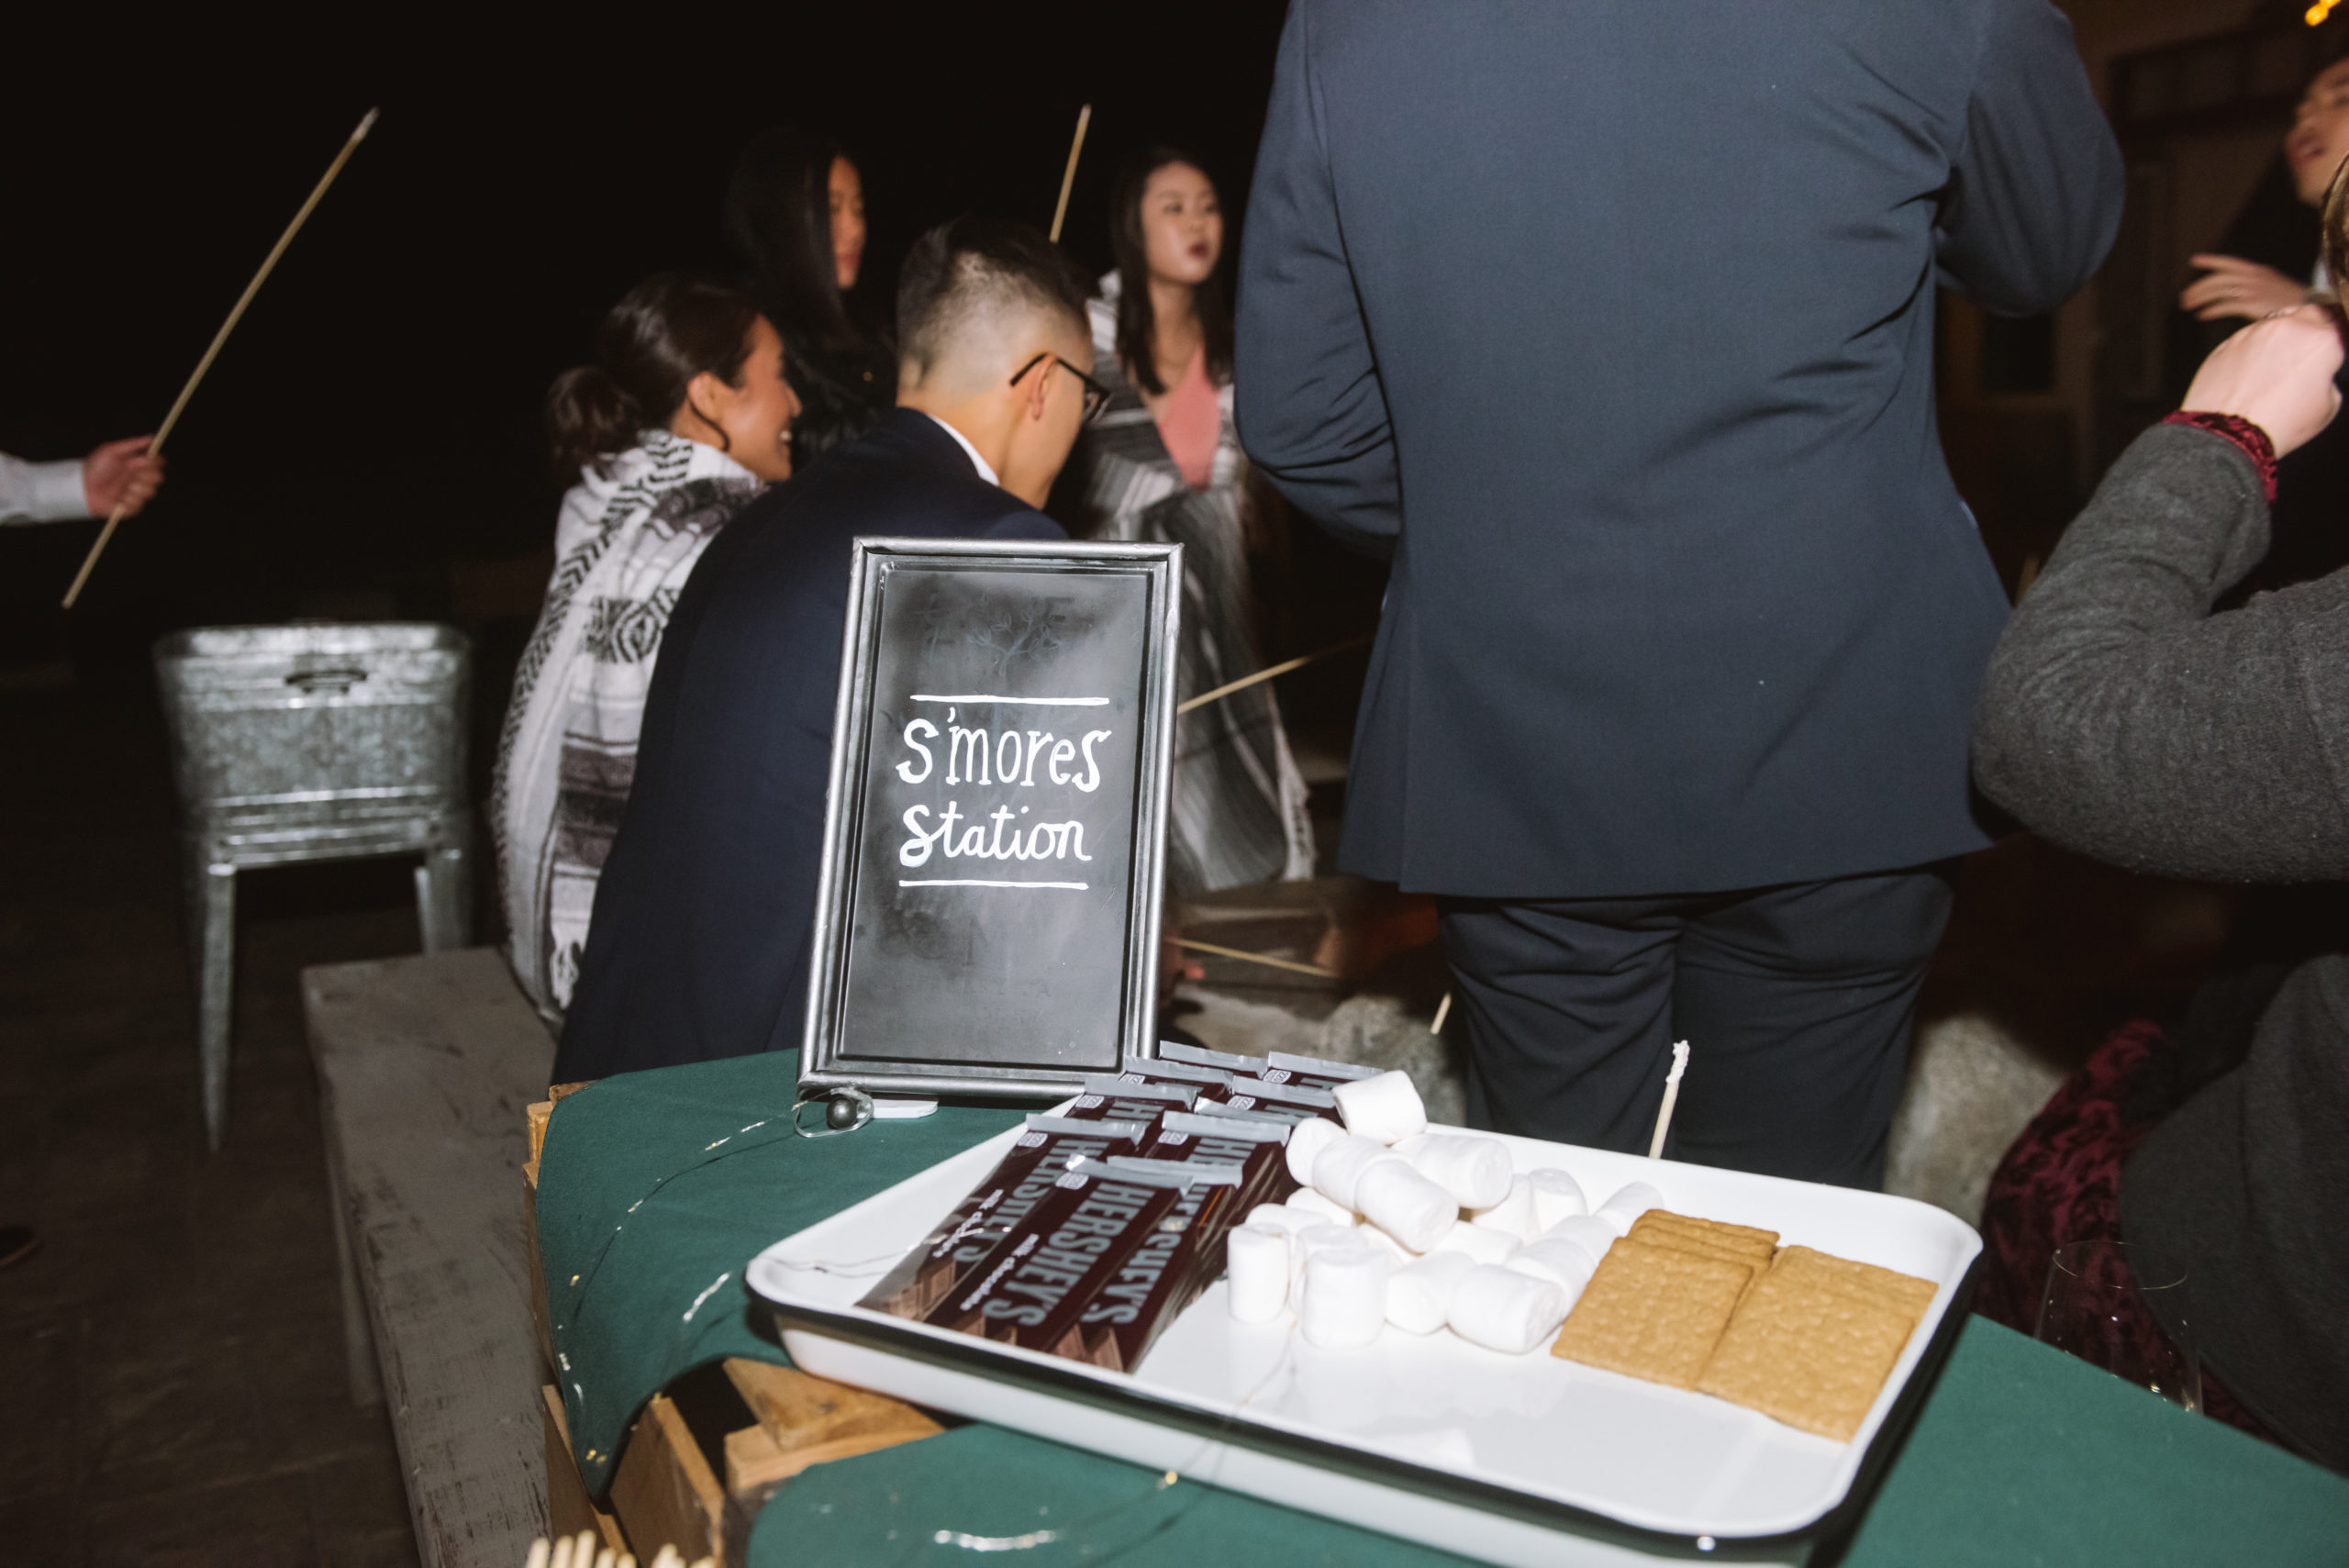 The s'mores station with a blackboard style sign that says "s'mores station" with a tray of Hershey's chocolate bars, marshmallows, and graham crackers. People are behind the station in various stages of eating s'mores.